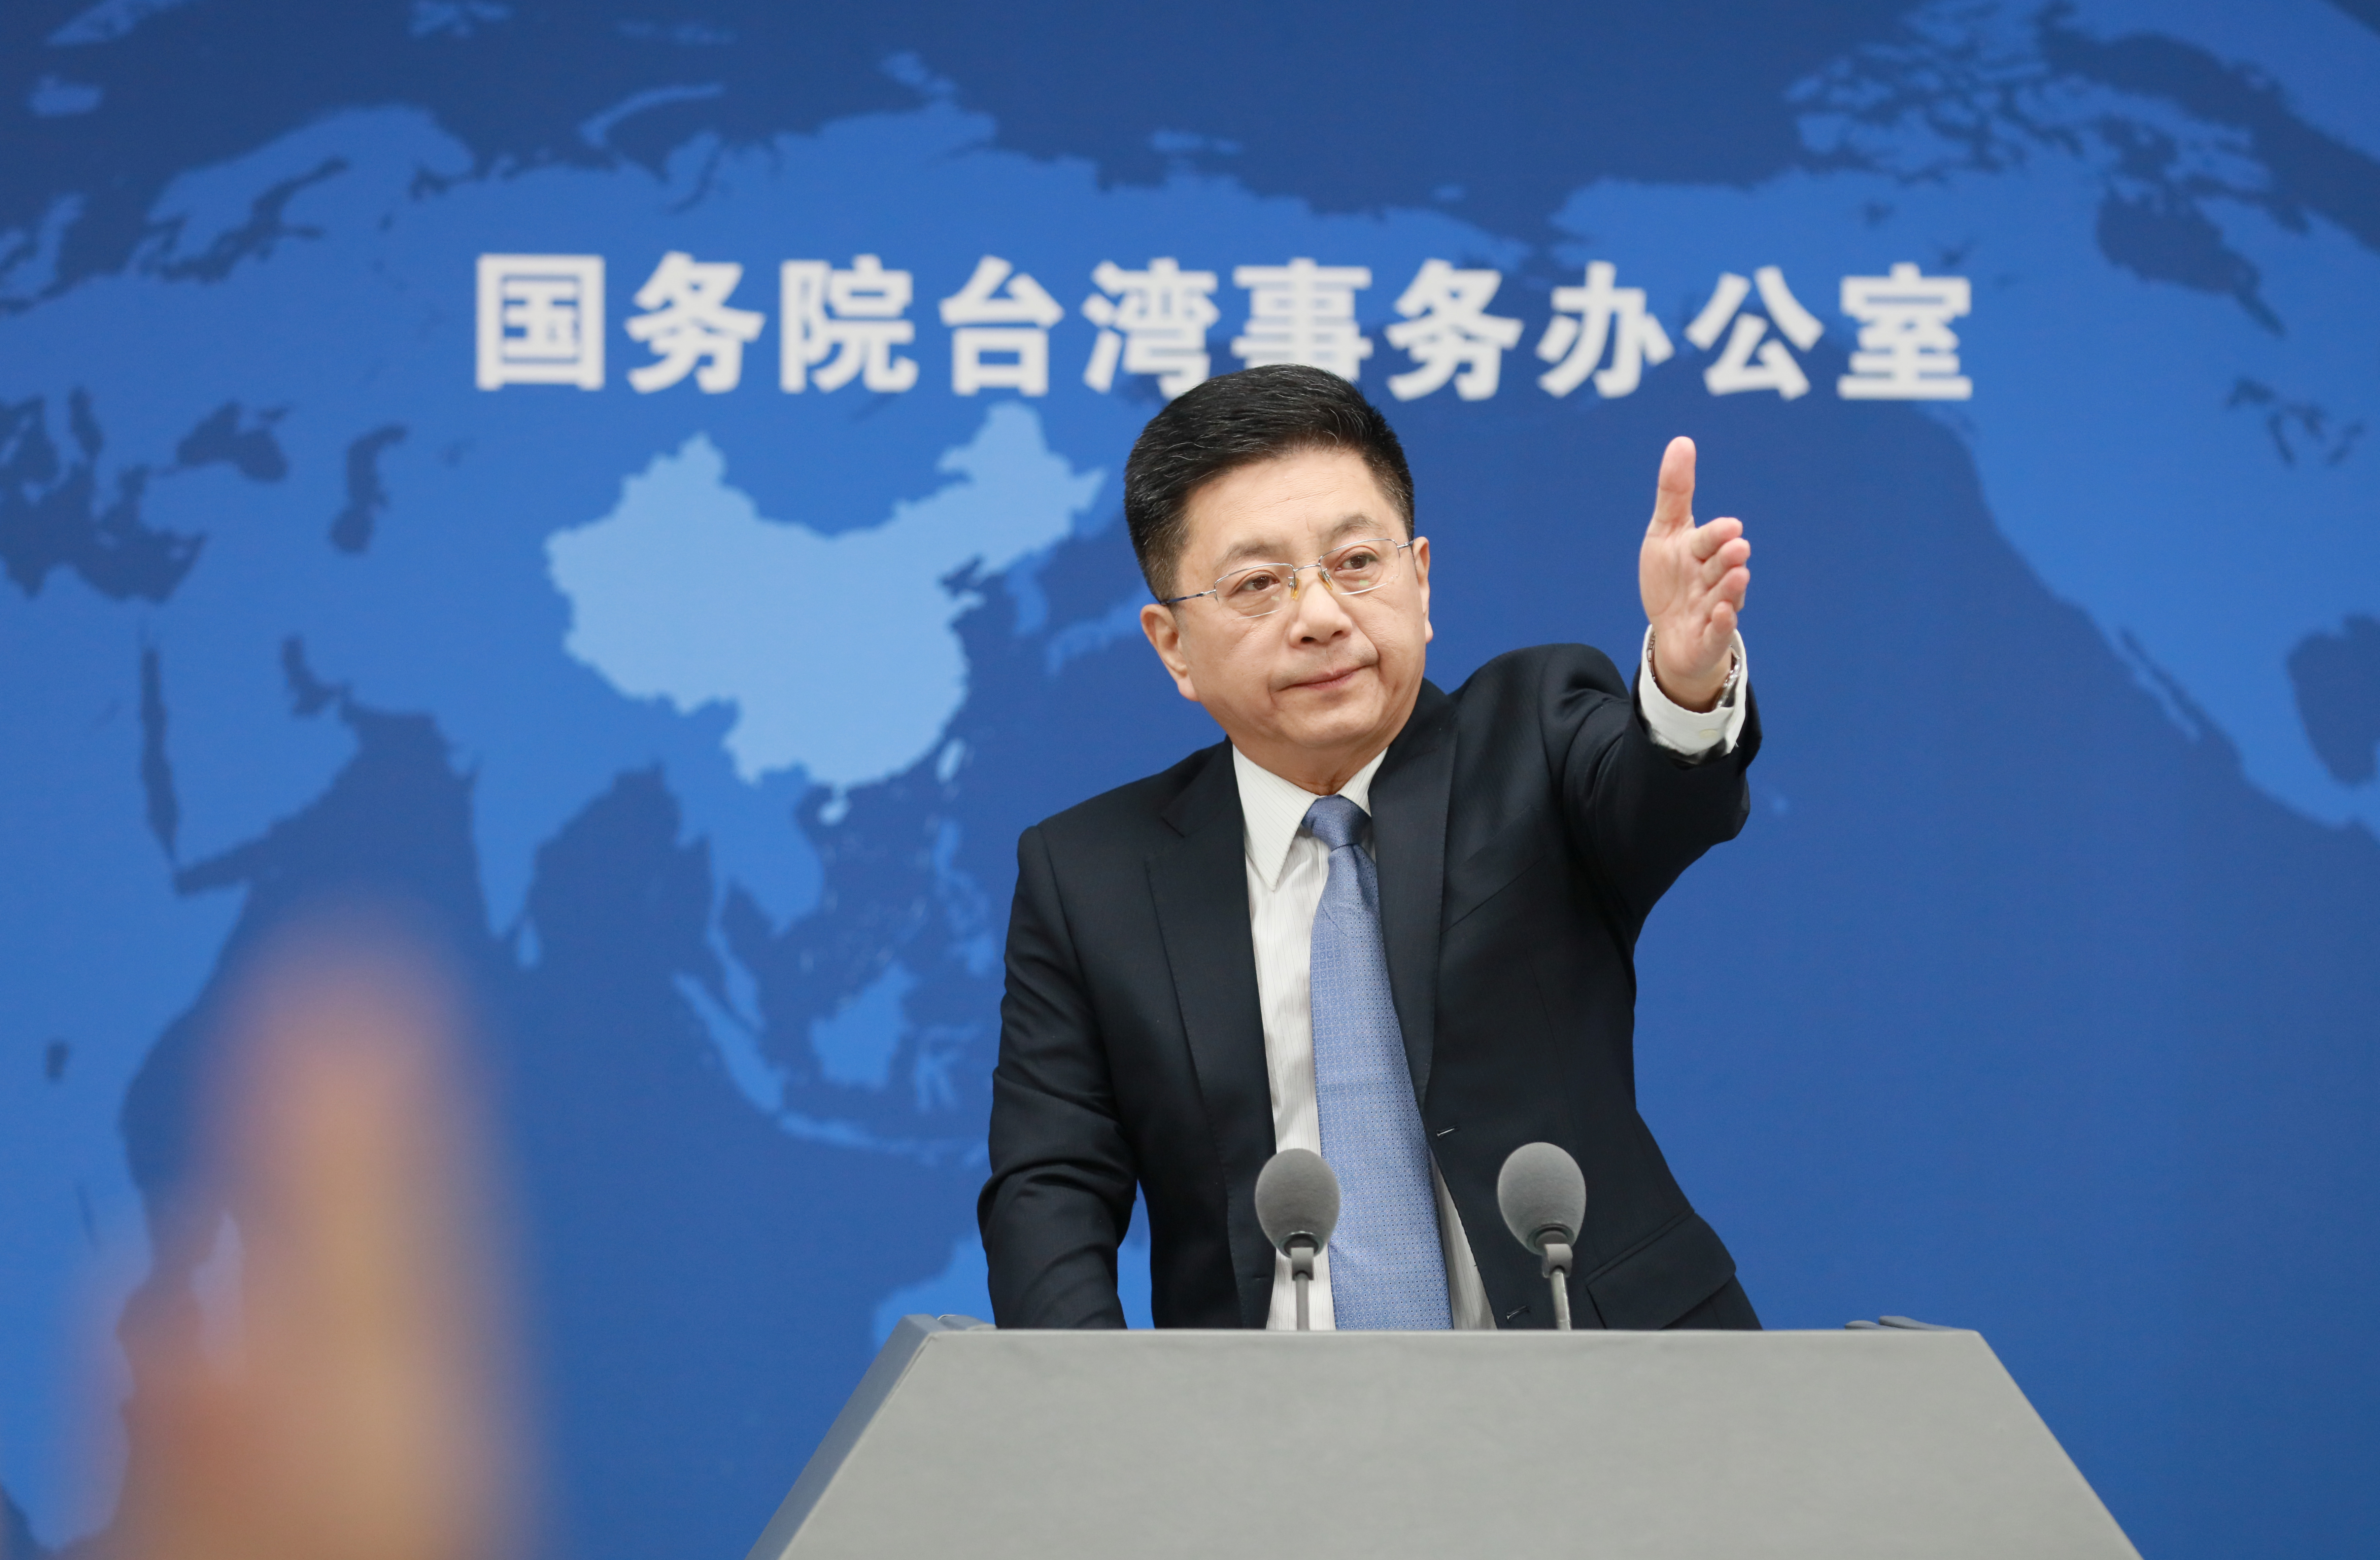 Ma Xiaoguang, spokesperson for the Taiwan Affairs Office of the State Council, attends a press conference on February 23 in Beijing, China.